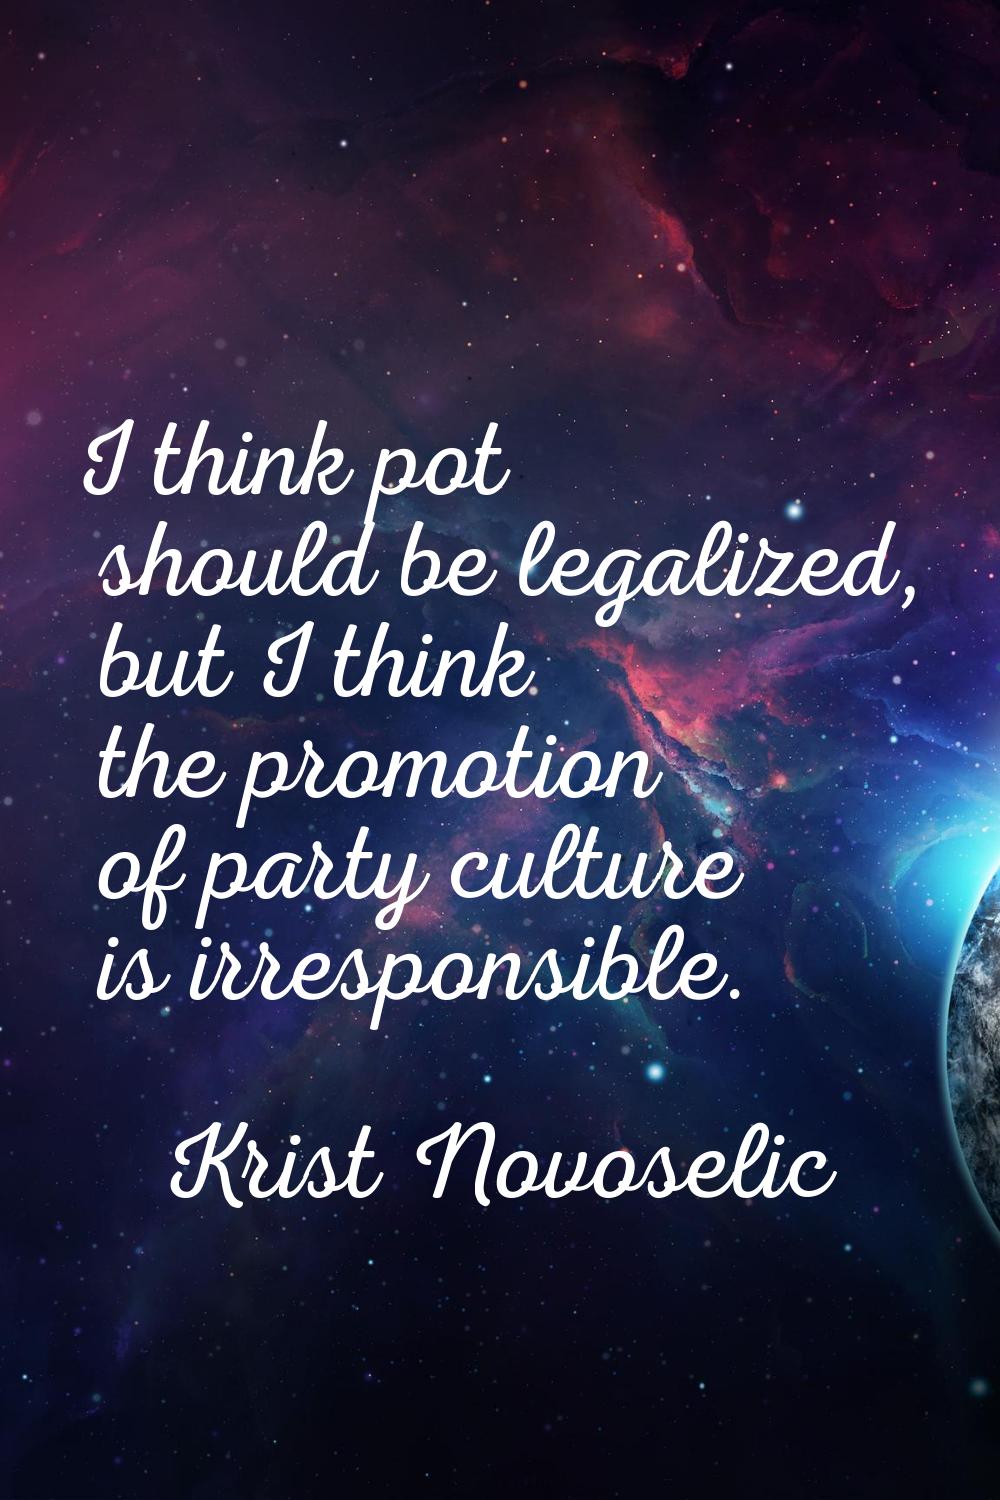 I think pot should be legalized, but I think the promotion of party culture is irresponsible.